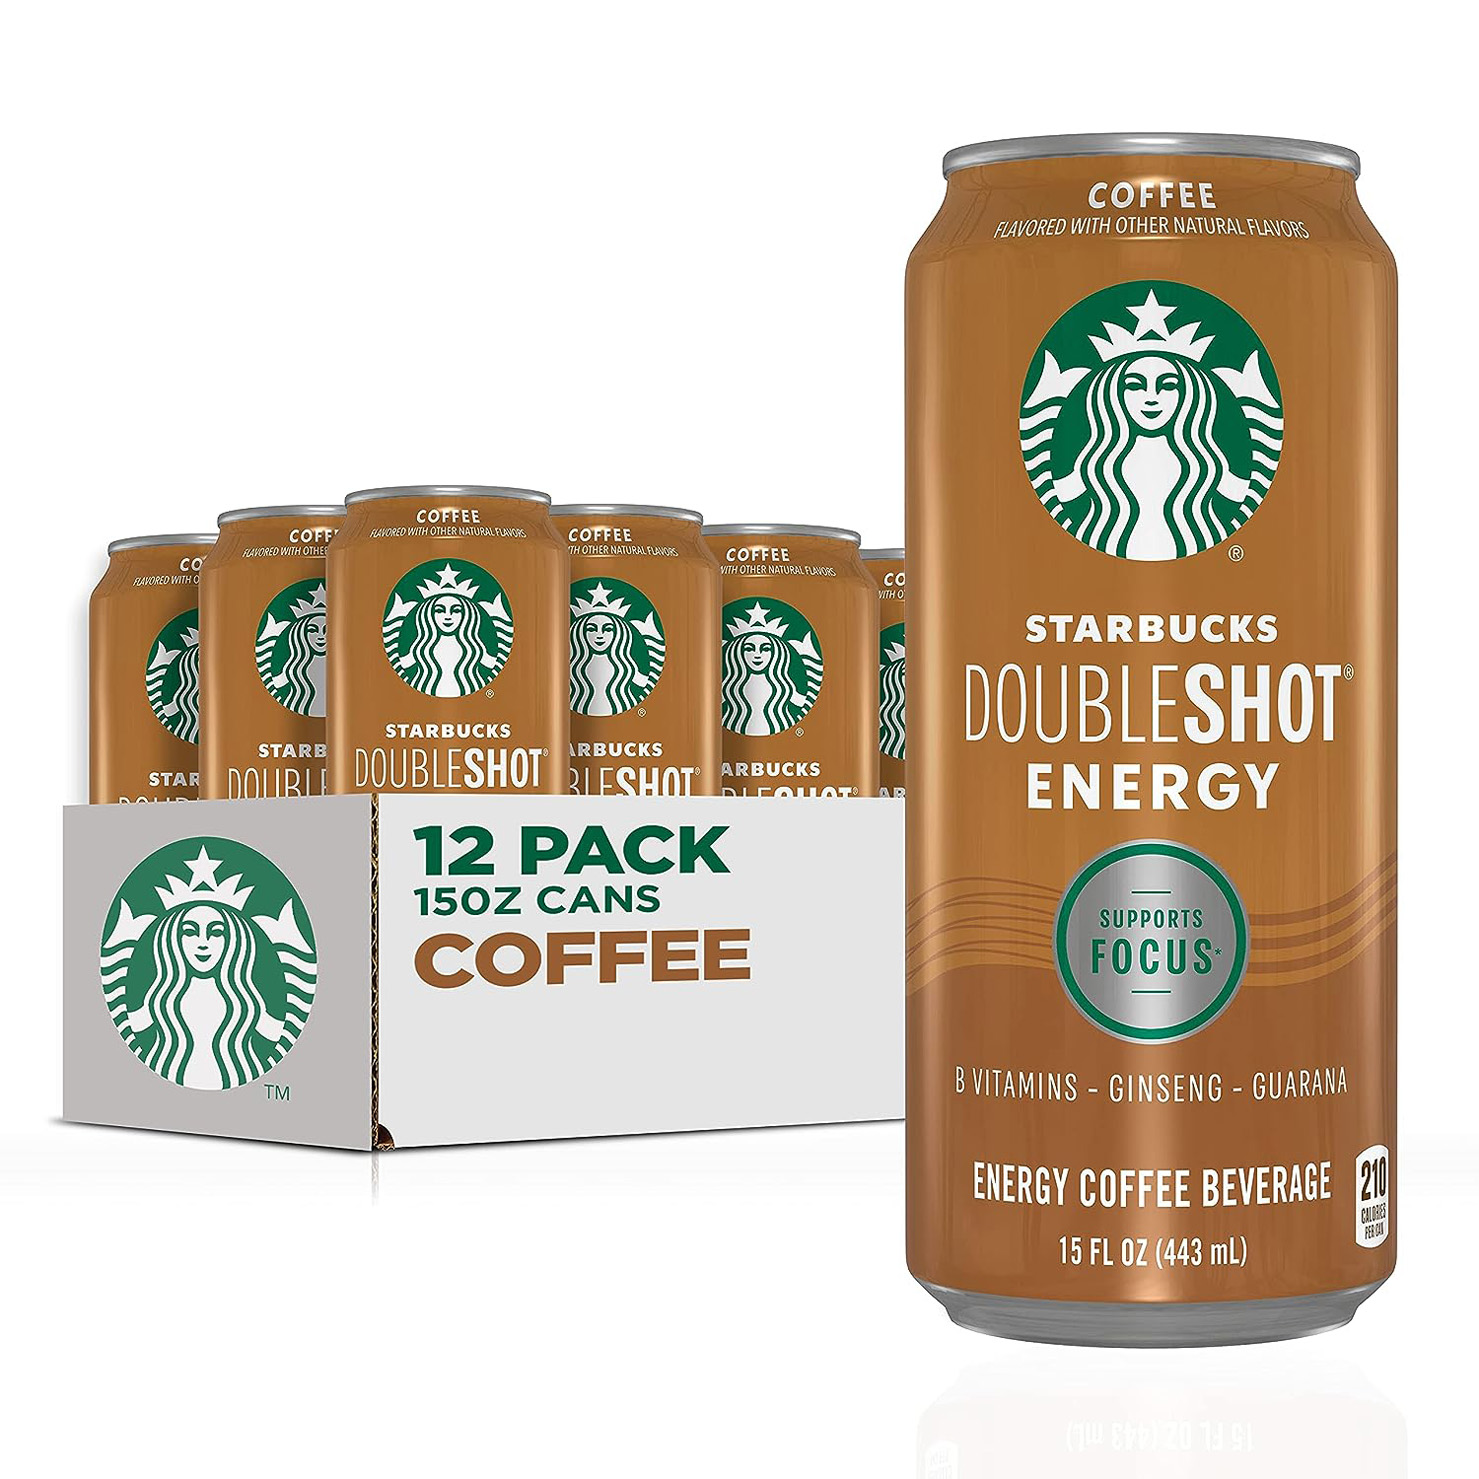 Starbucks RTD Energy Drink, Doubleshot Energy Drink, Coffee, Guarana, Vitamin B, Ginseng, 15 oz Cans (12 Pack)